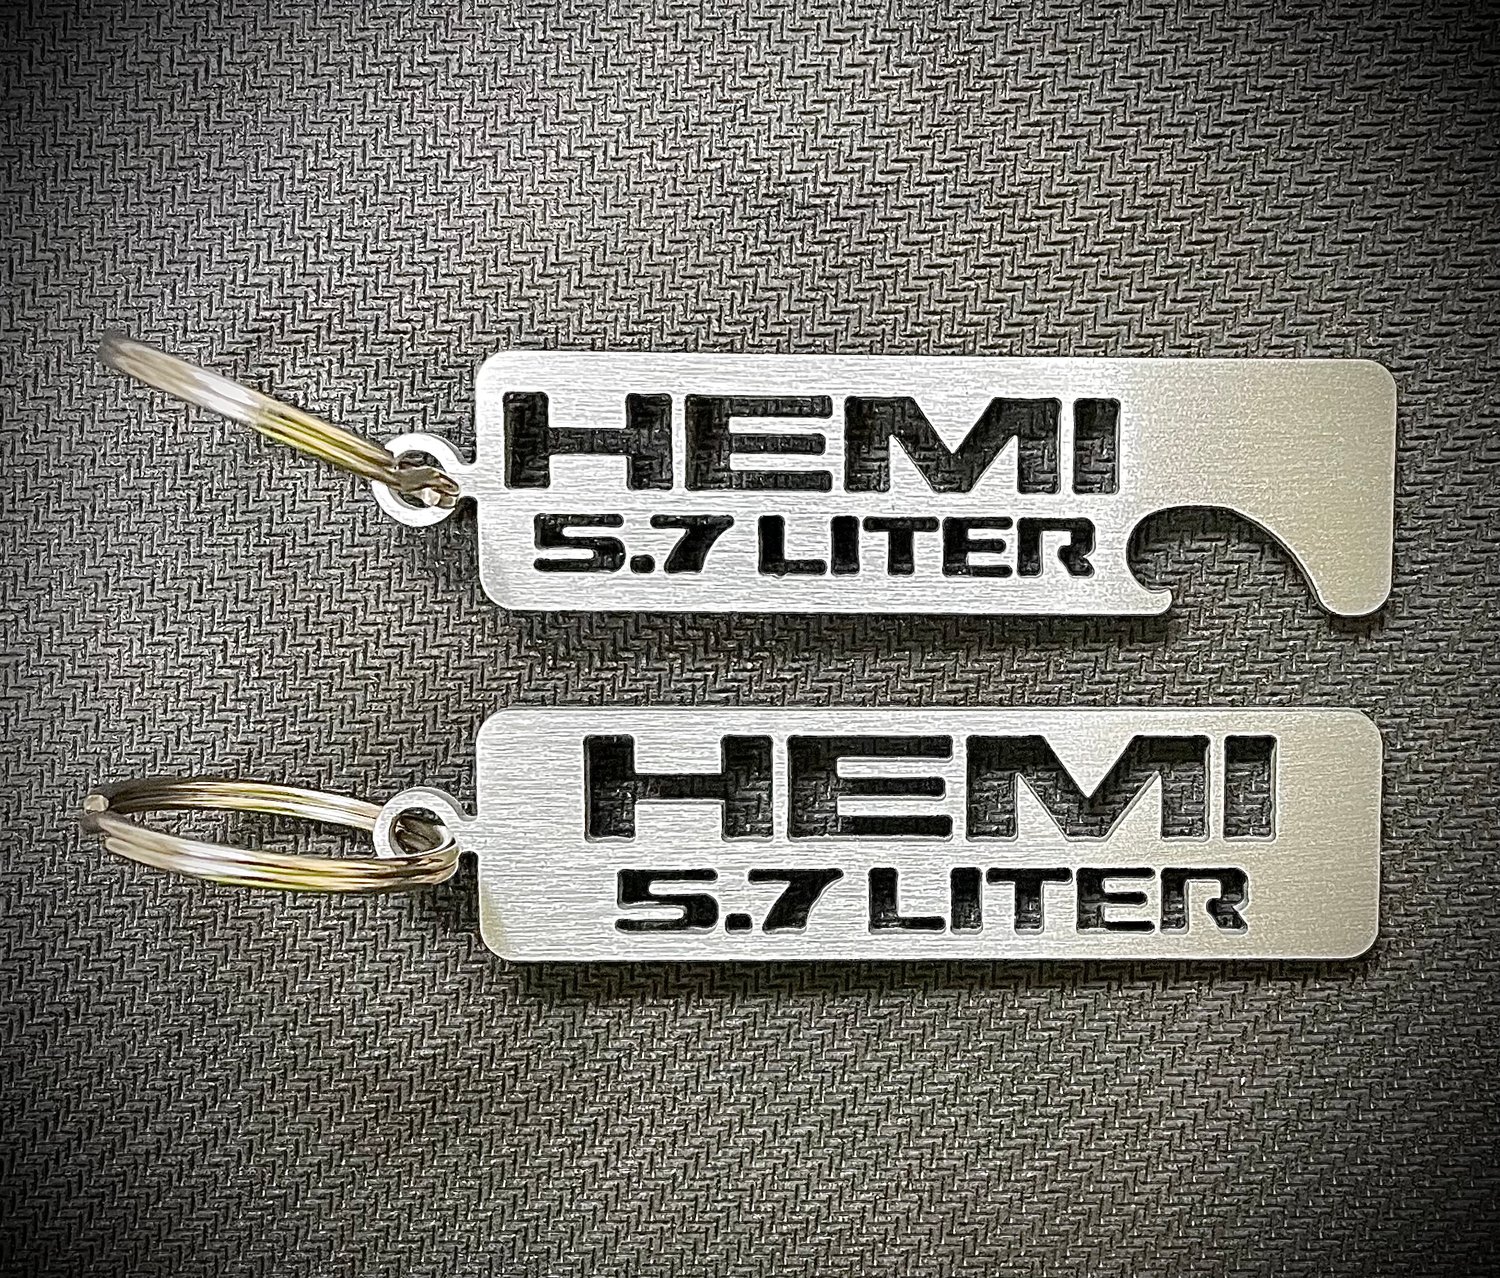 For Hemi 5.7 Liter Enthusiasts 